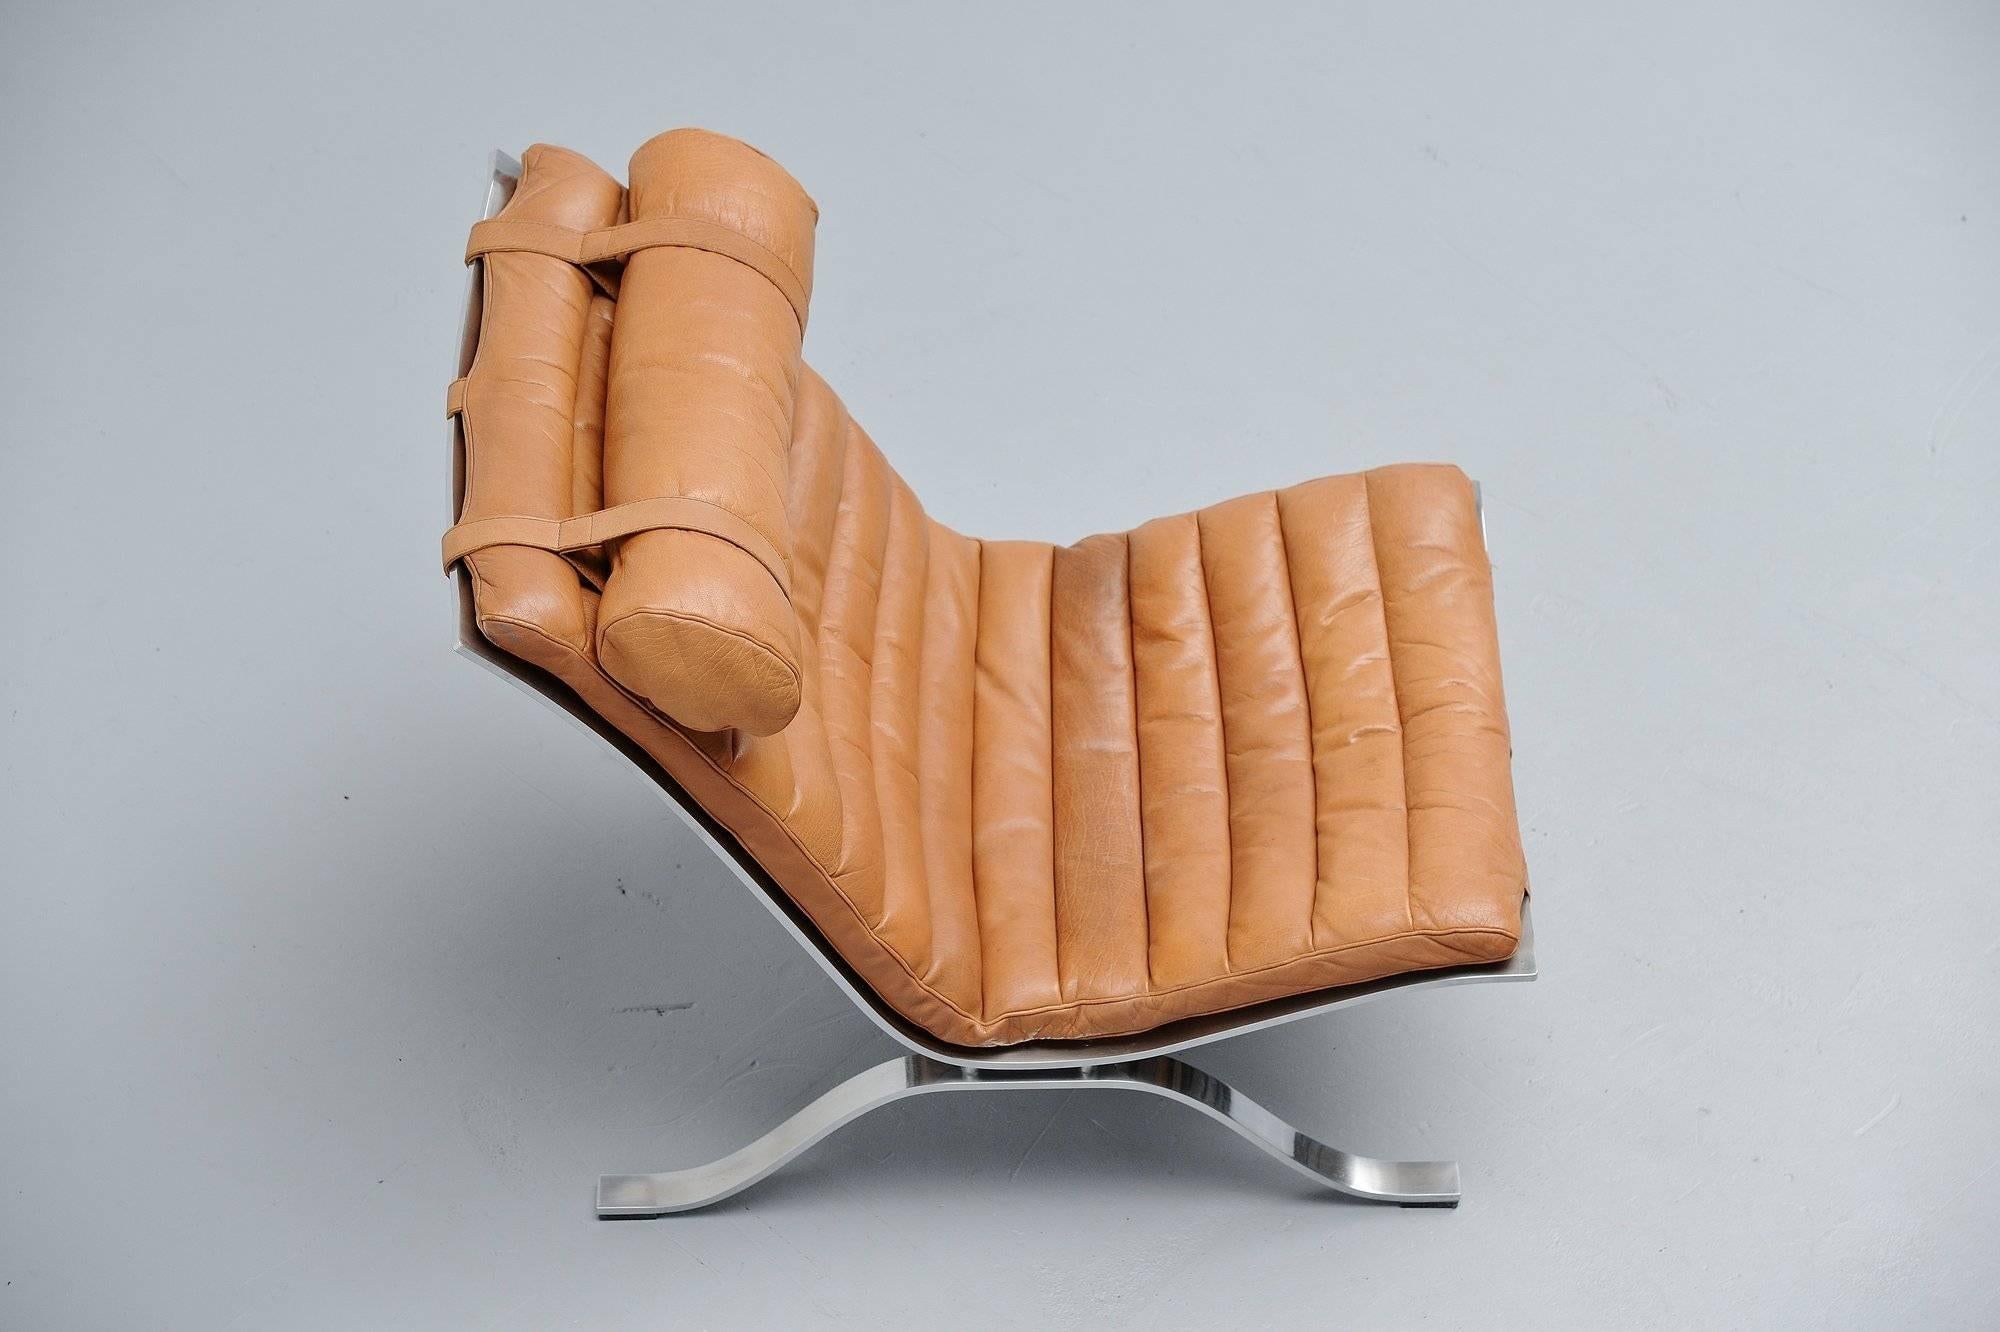 Plated Arne Norell Ari Lounge Chair, Sweden, 1966